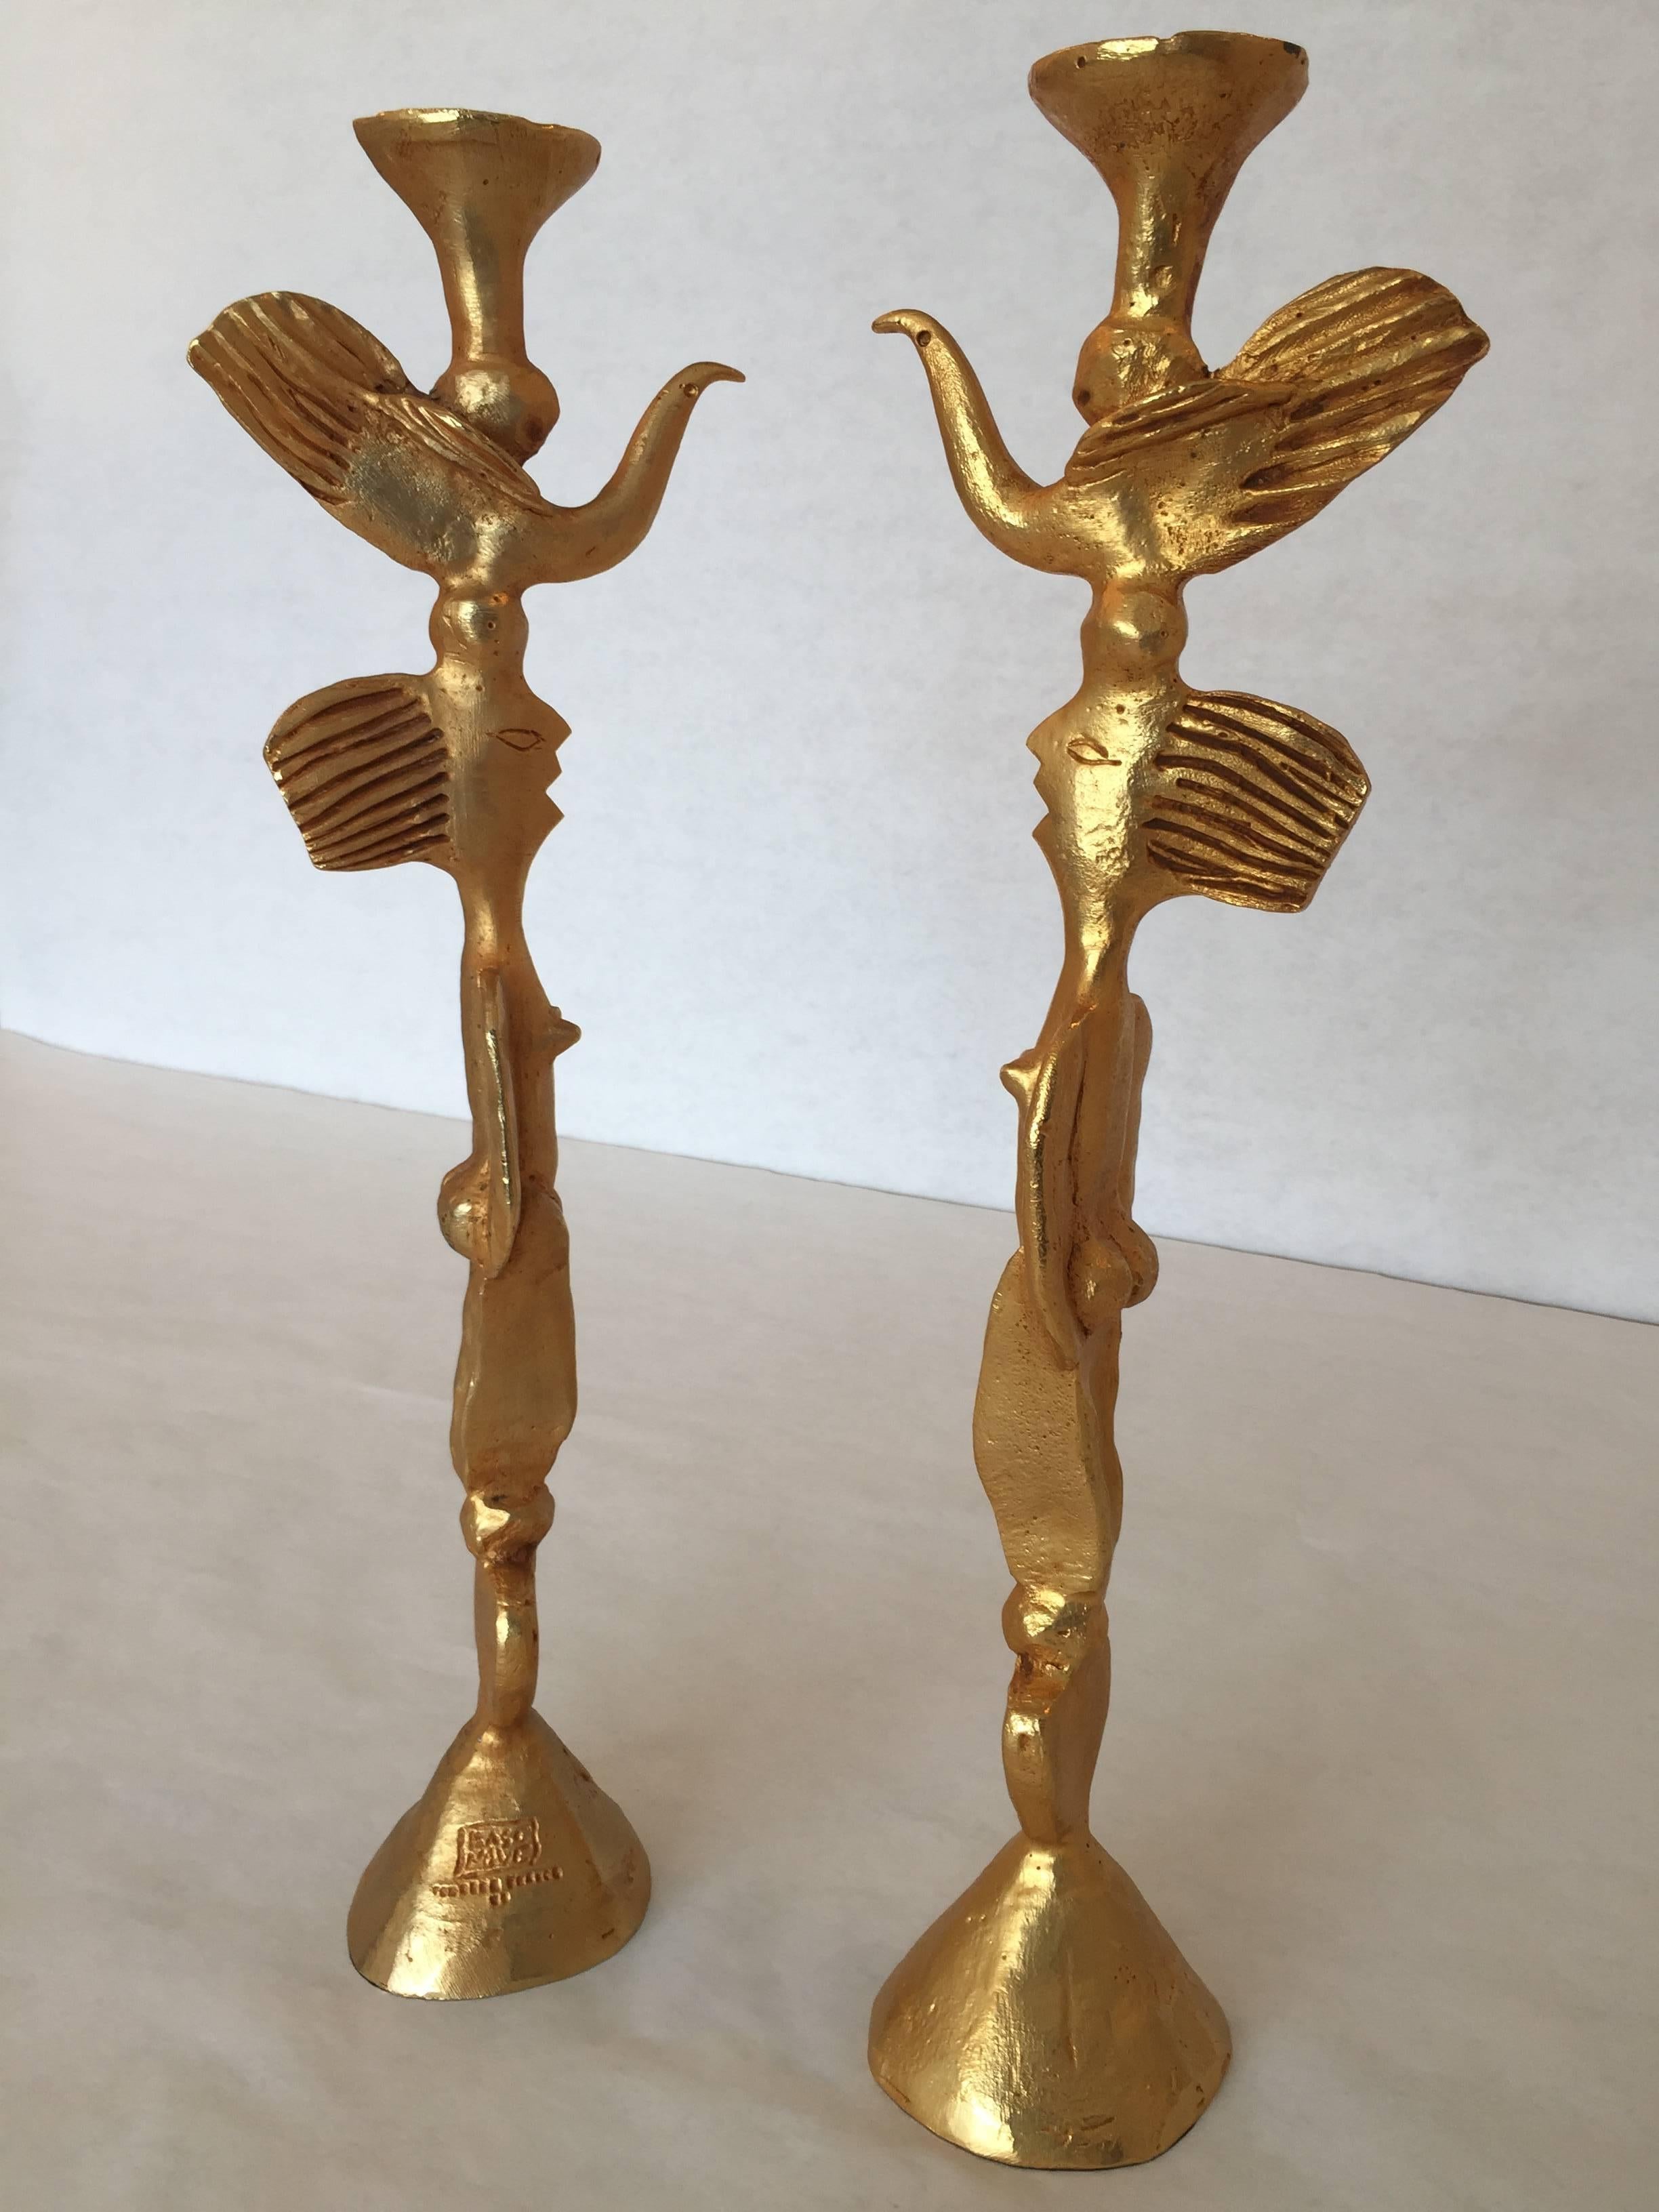 Pair of whimsical bronze candlesticks by Pierre Casenove featuring birds and figural bodies. These are very heavy and quality made.